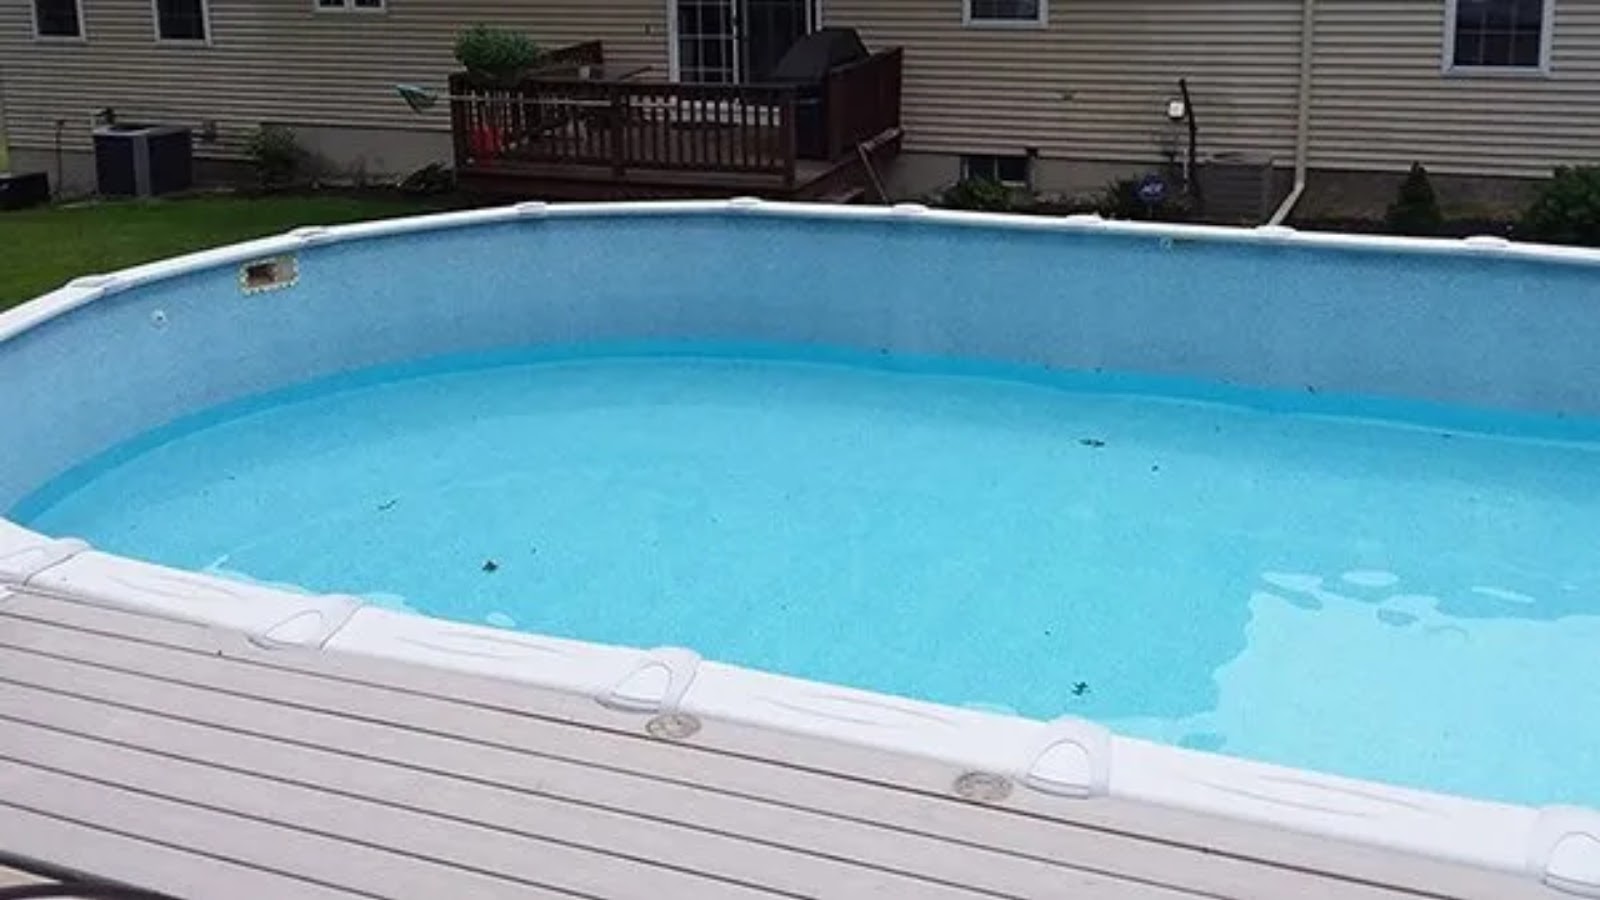 Lower the Pool Water Level